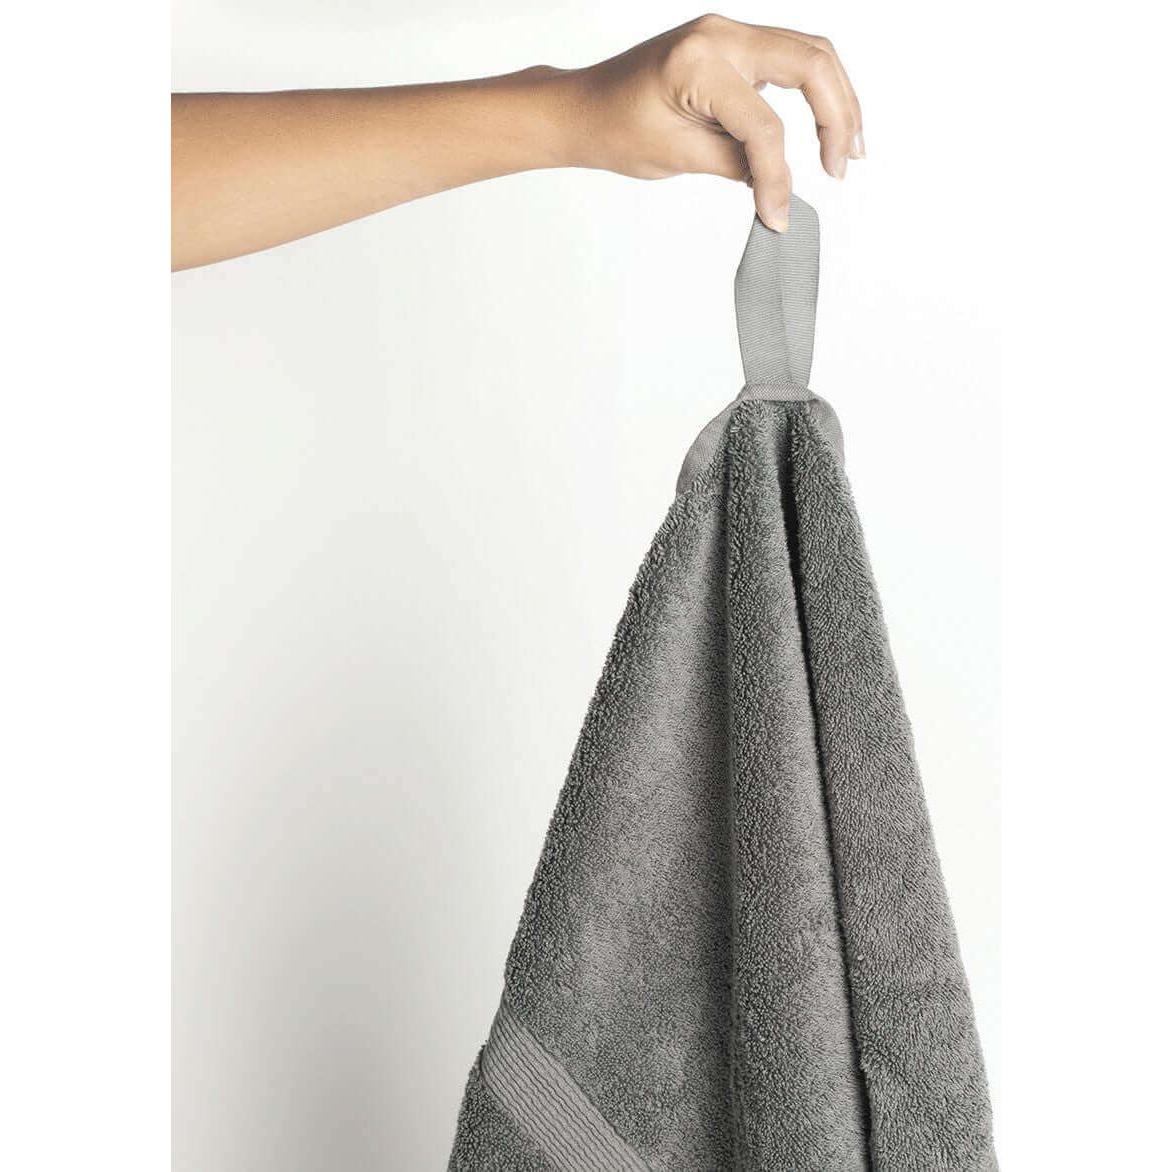 Nebia Hand Towel - front view of hand holding towel in color grey